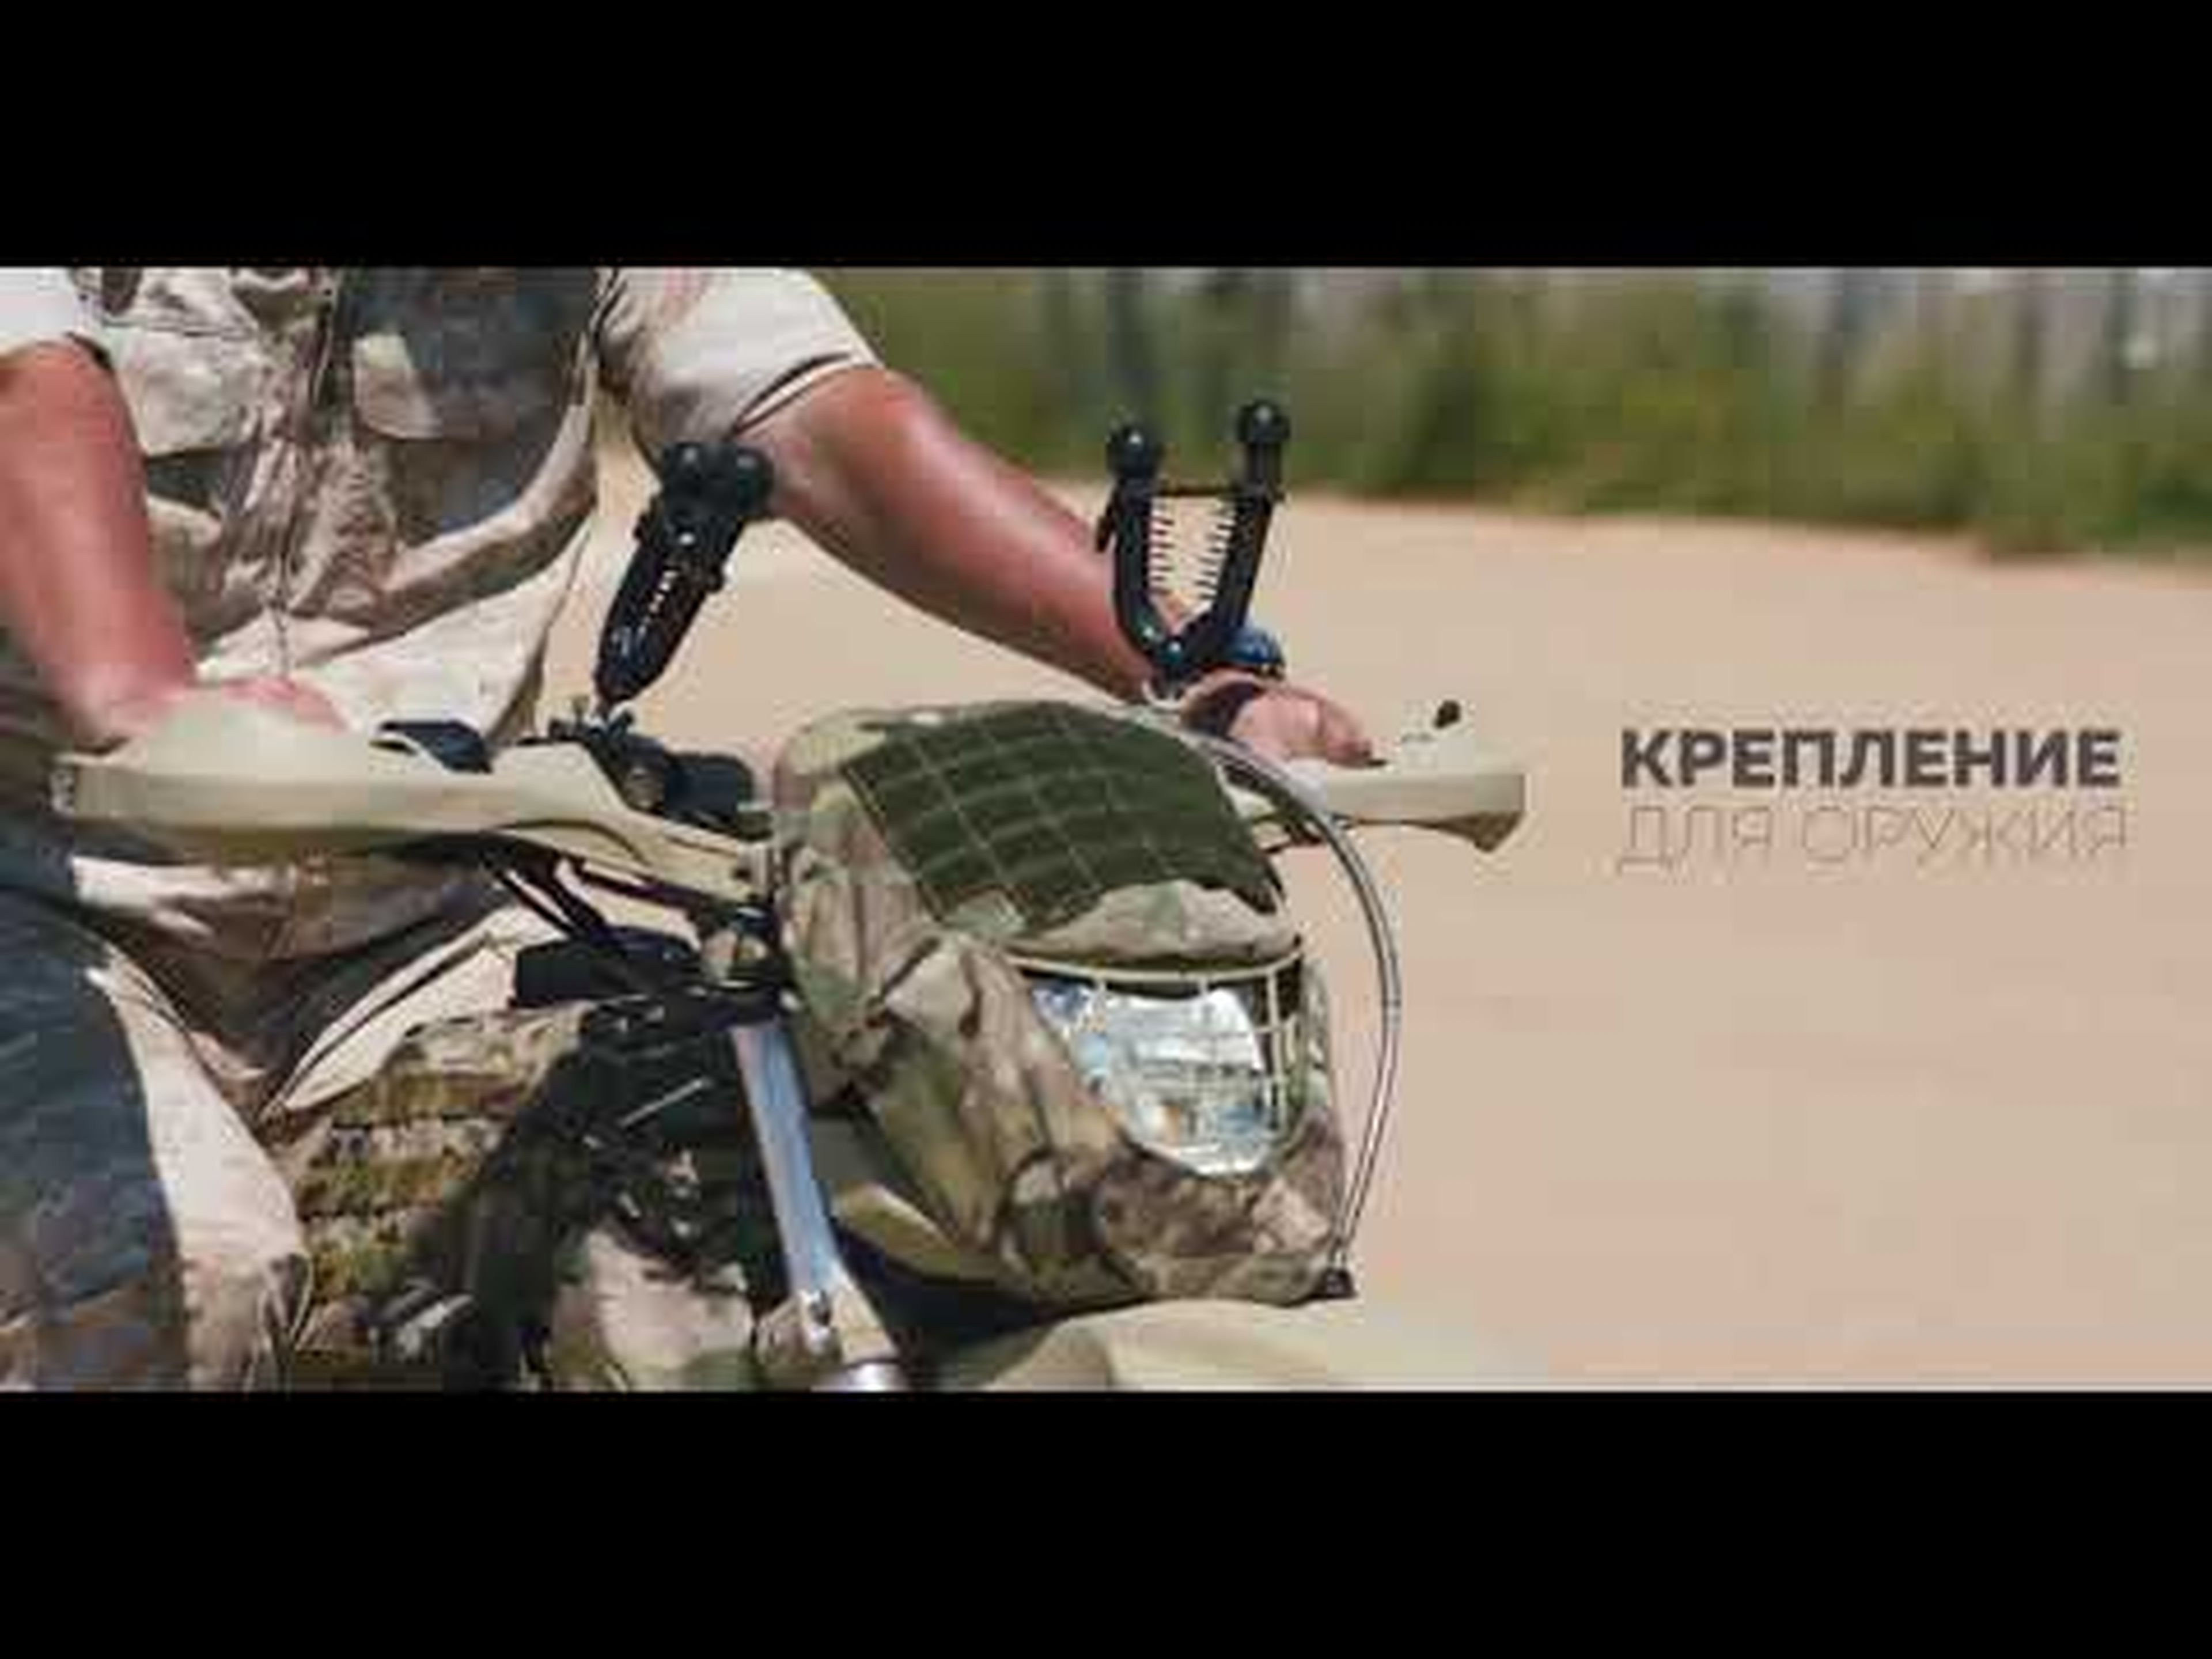 2017 Kalashnikov IZH Иж electric Speciale Forces motorcycle